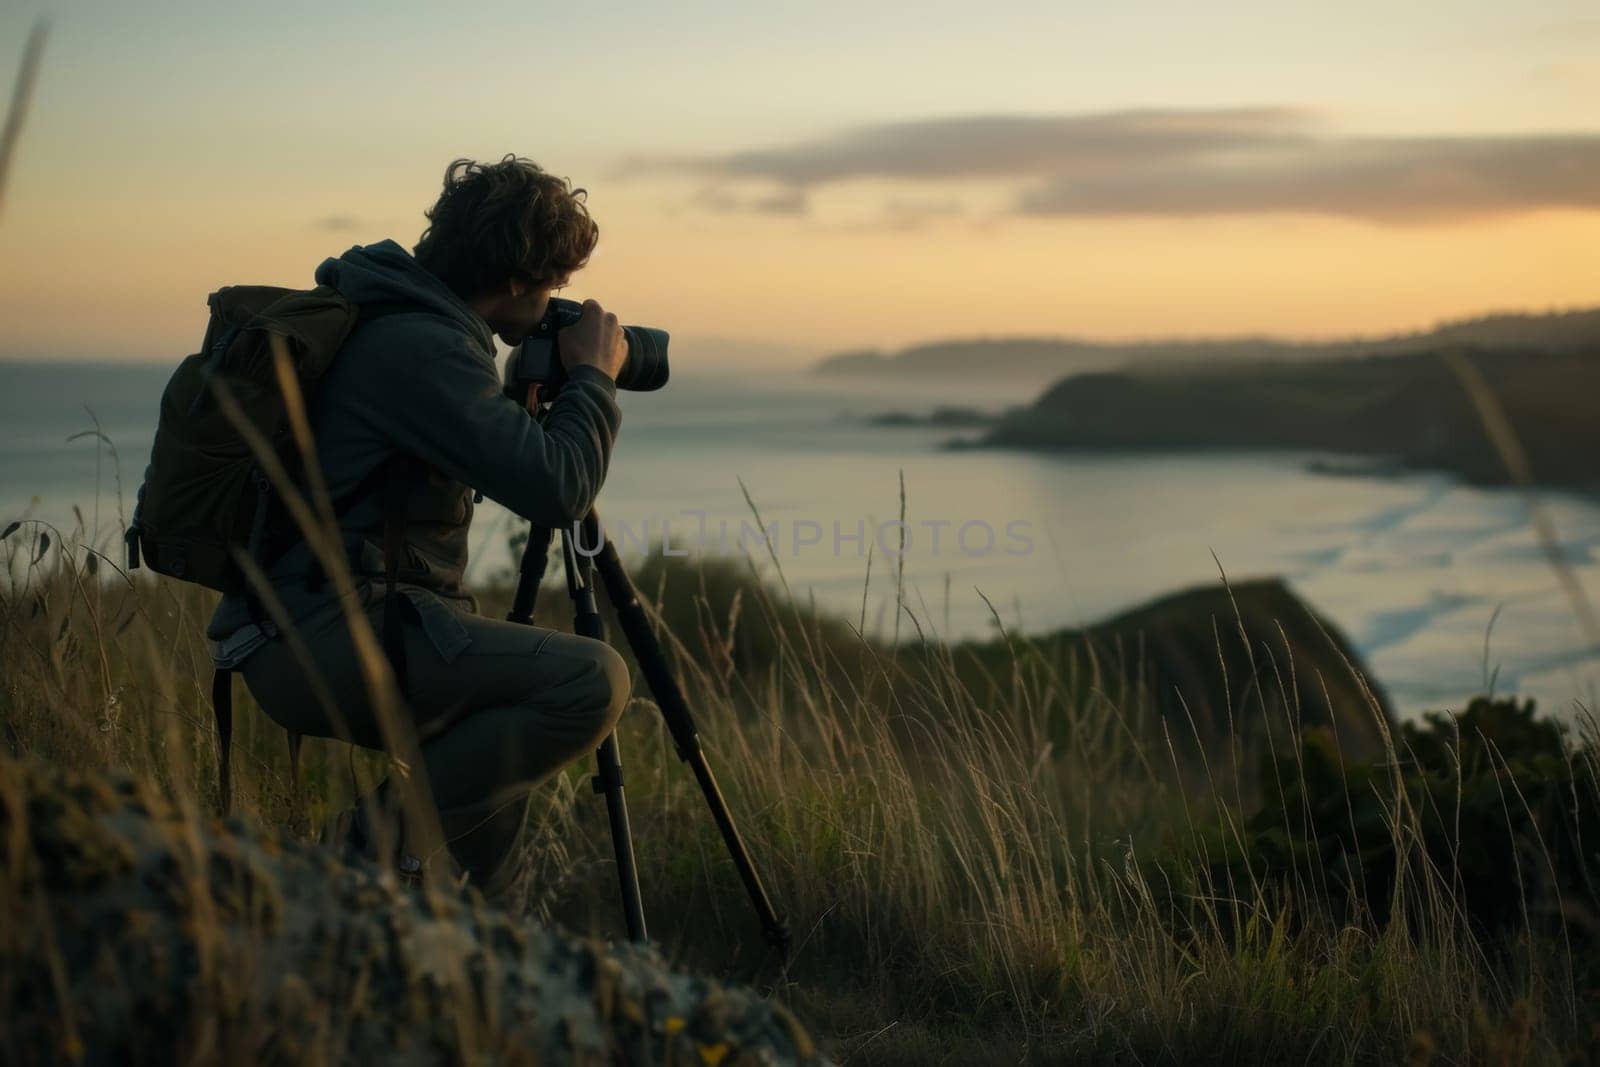 A solitary photographer is immersed in capturing the tranquil beauty of a landscape at dusk, with the golden light softening the rugged terrain.